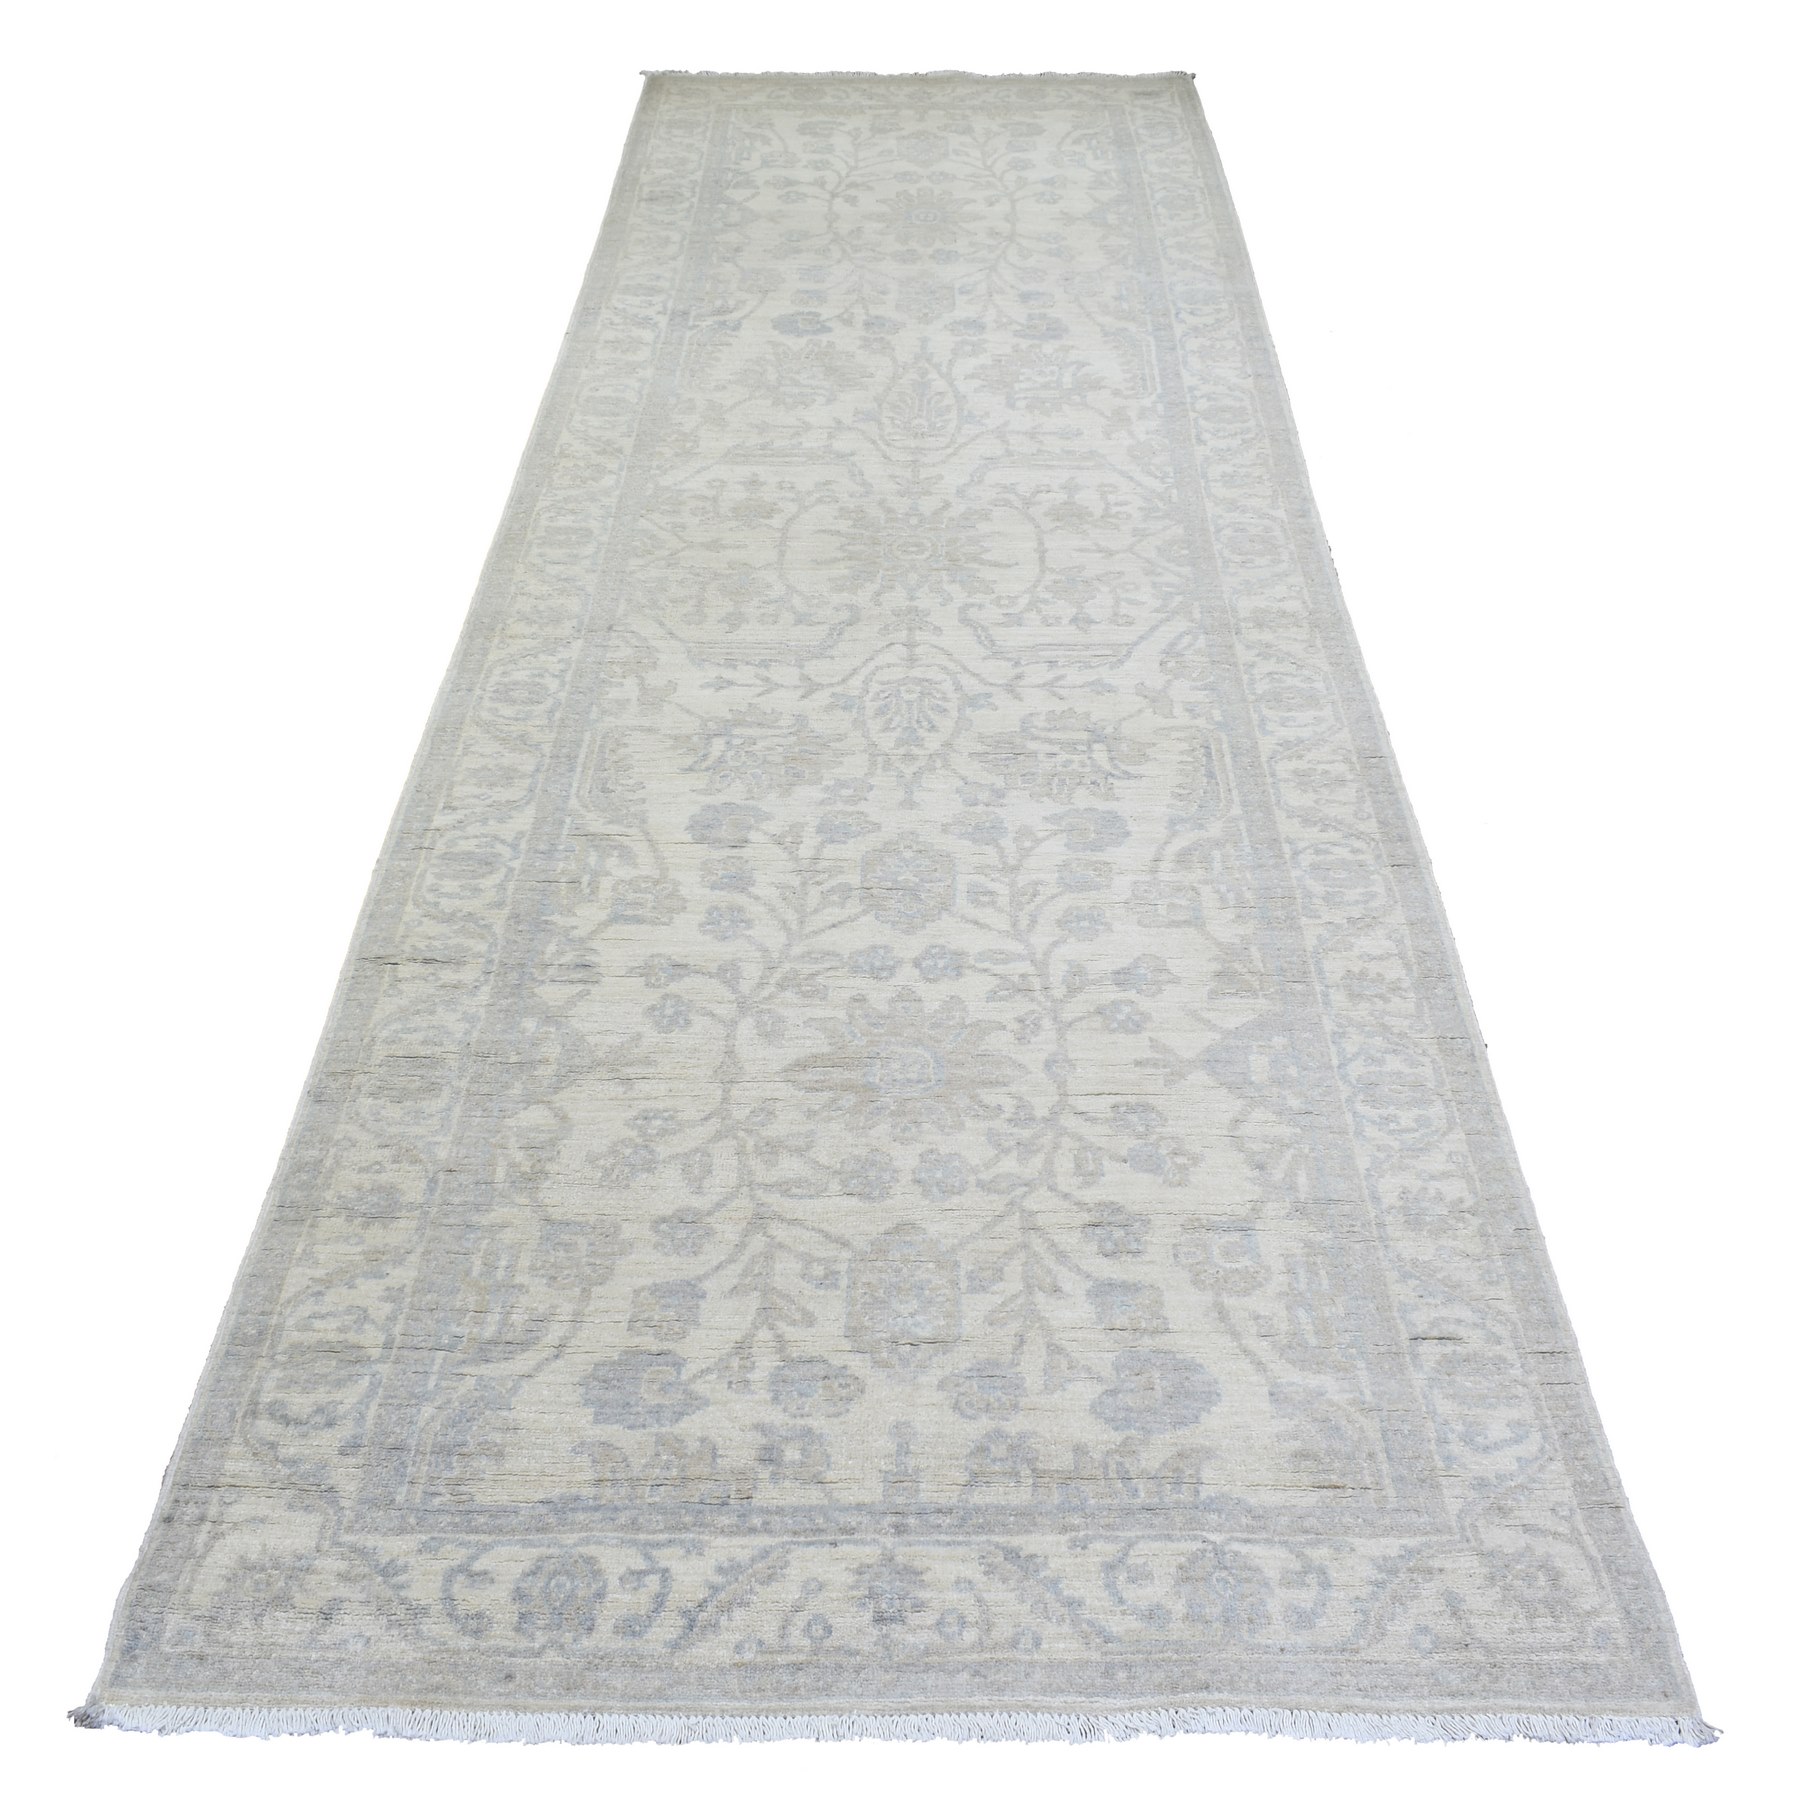 4'x12' Ivory, Hand Woven White Wash Peshawar with All Over Leaf Design, Natural Dyes Extra Soft Wool, Wide Runner Oriental Rug 